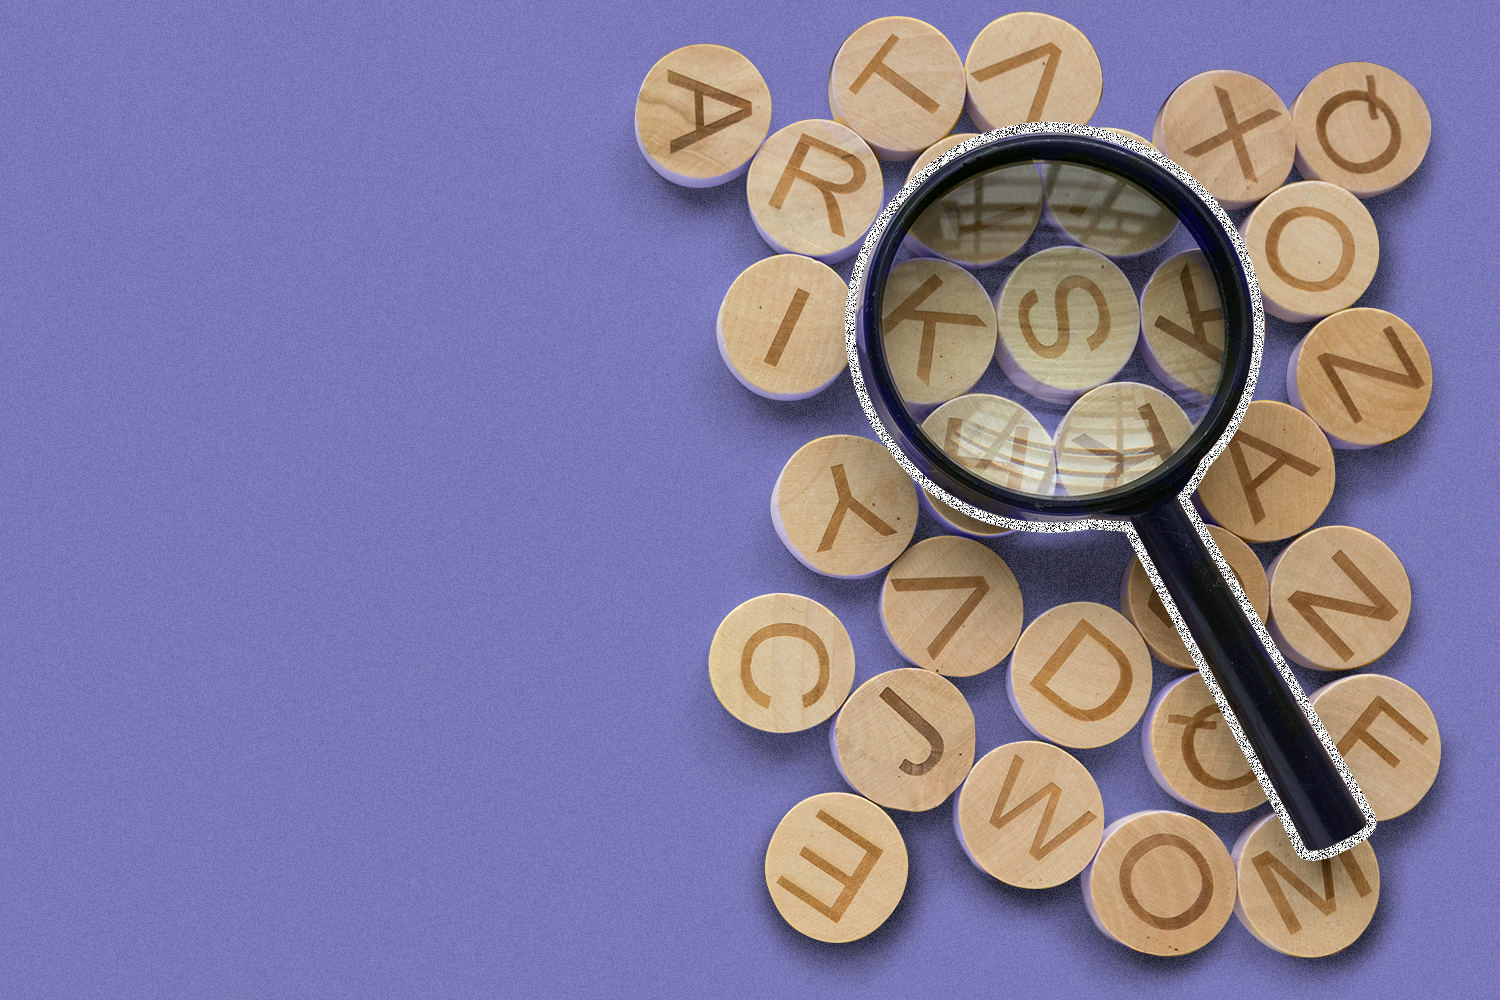 Round letter blocks on a purple background with a magnifying glass laying on top of the blocks.